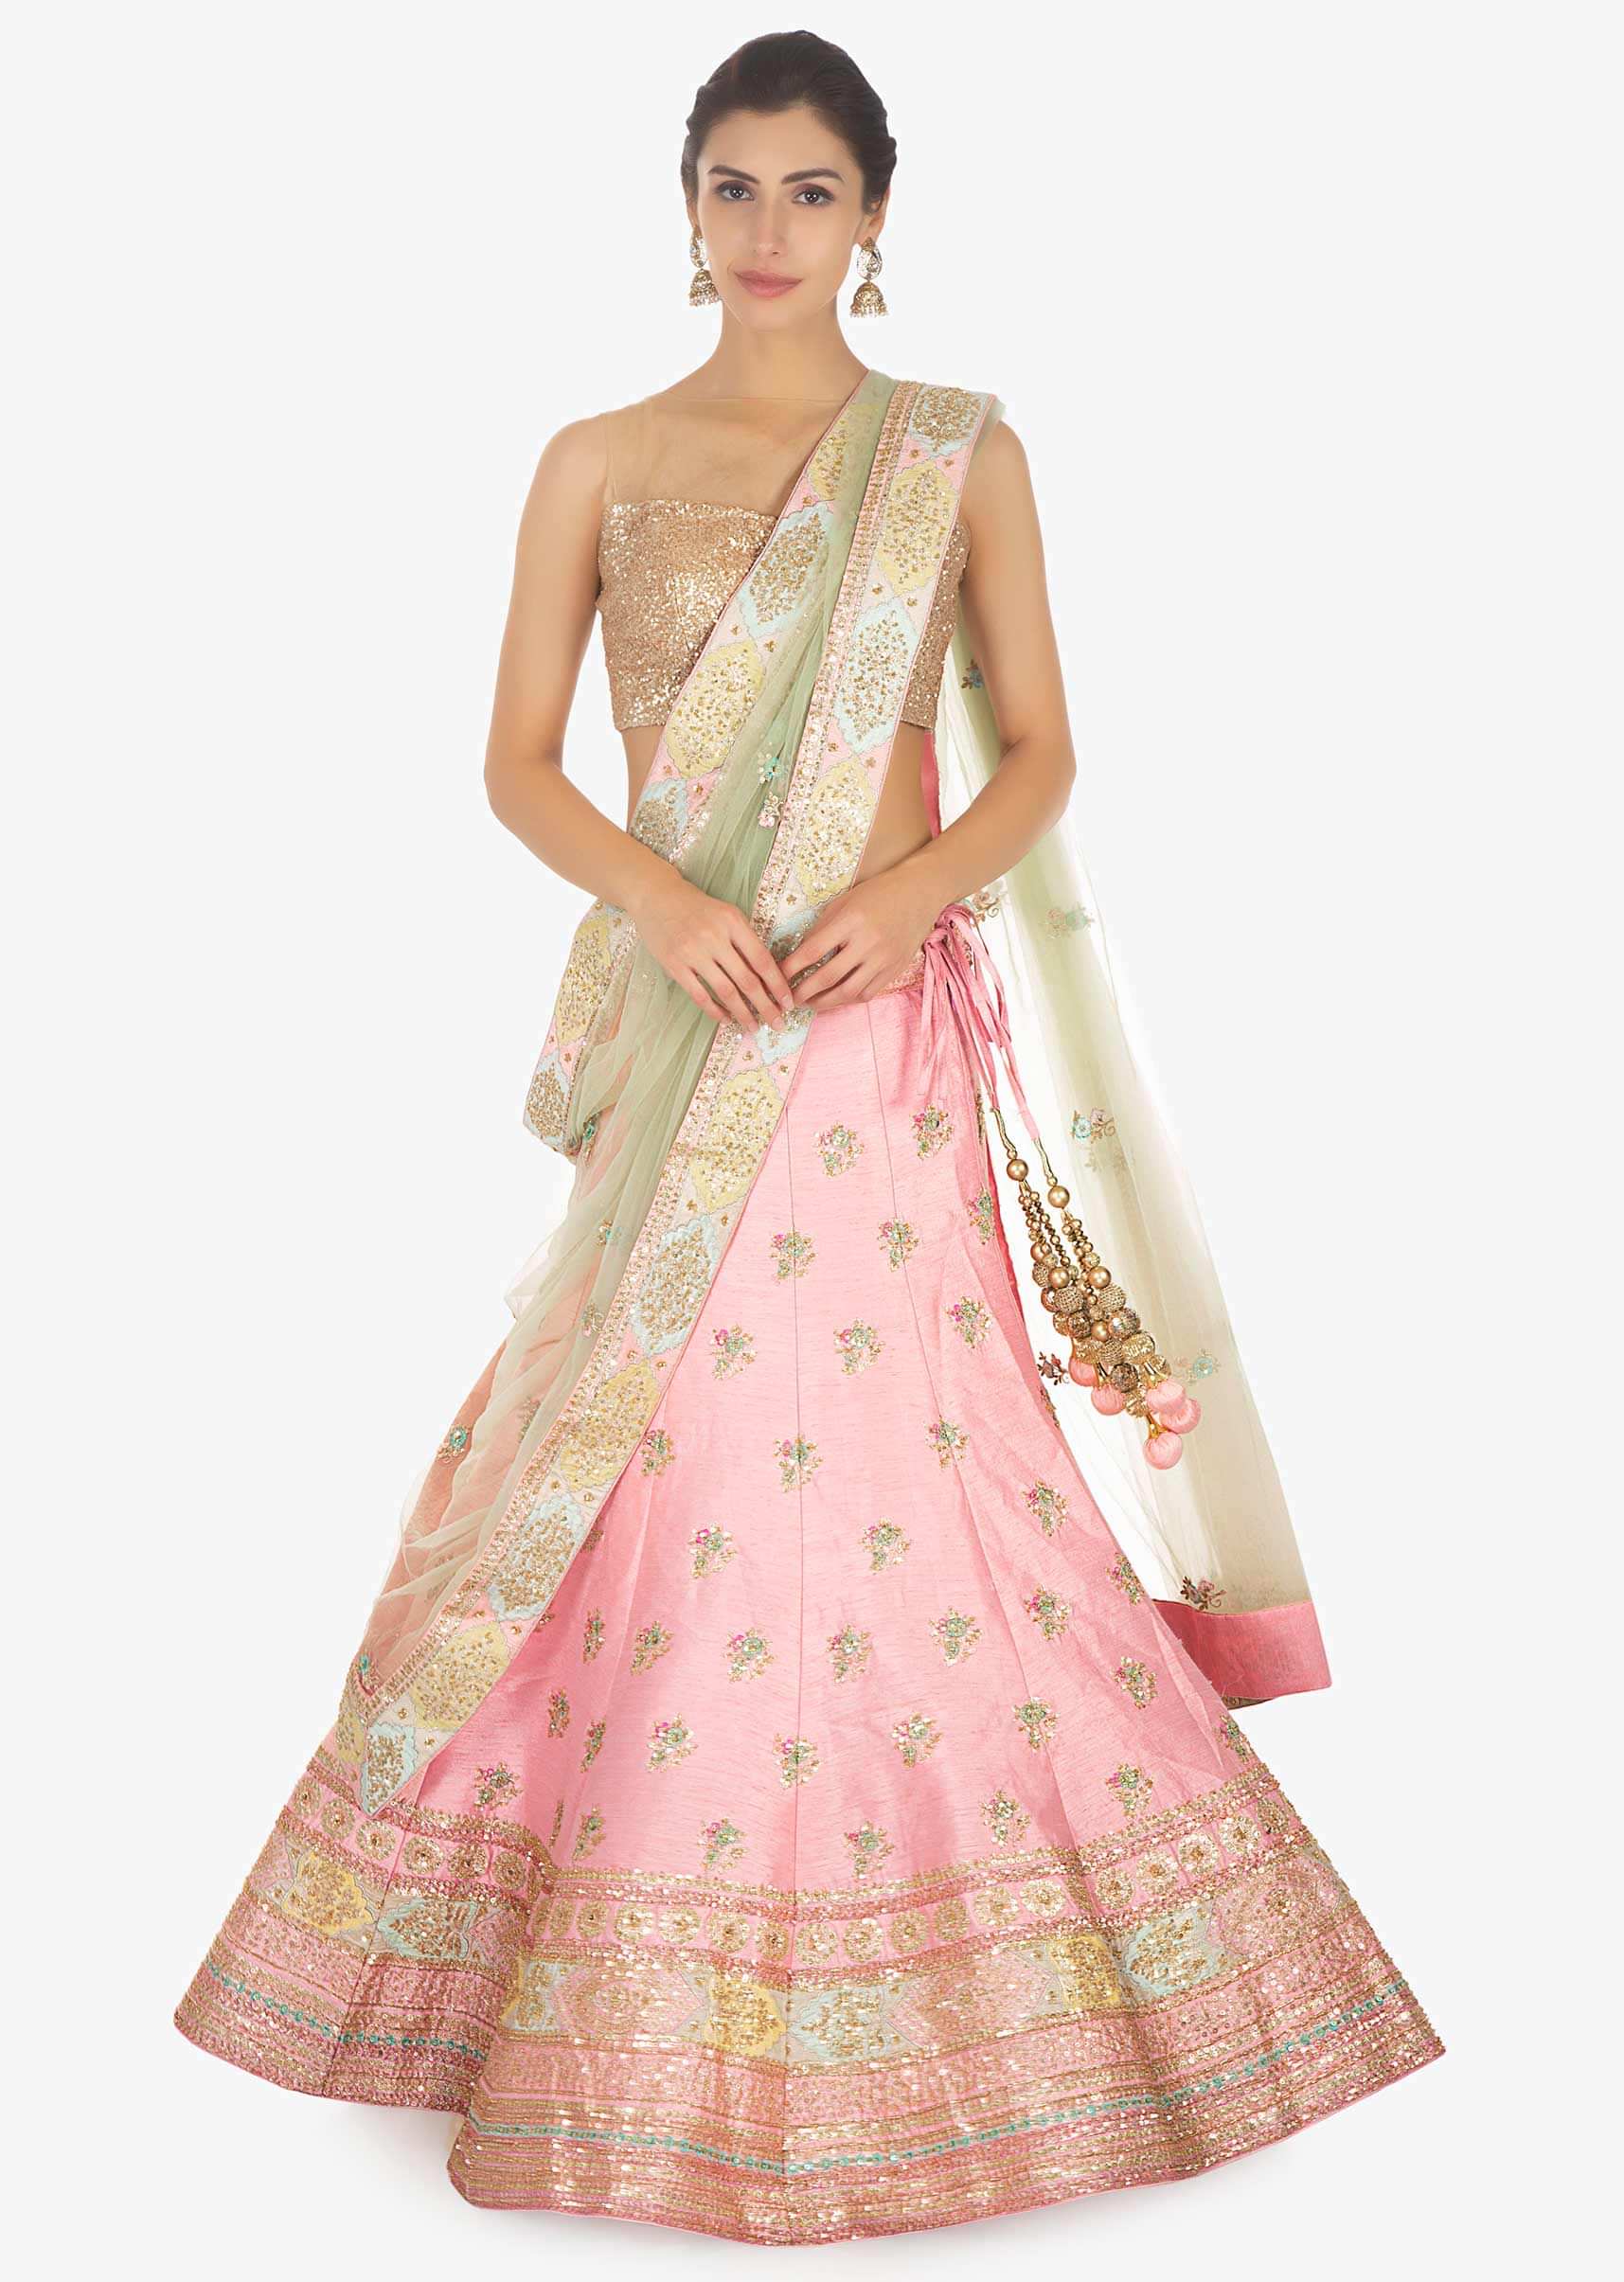 Top more than 158 pastel pink and green lehenga best